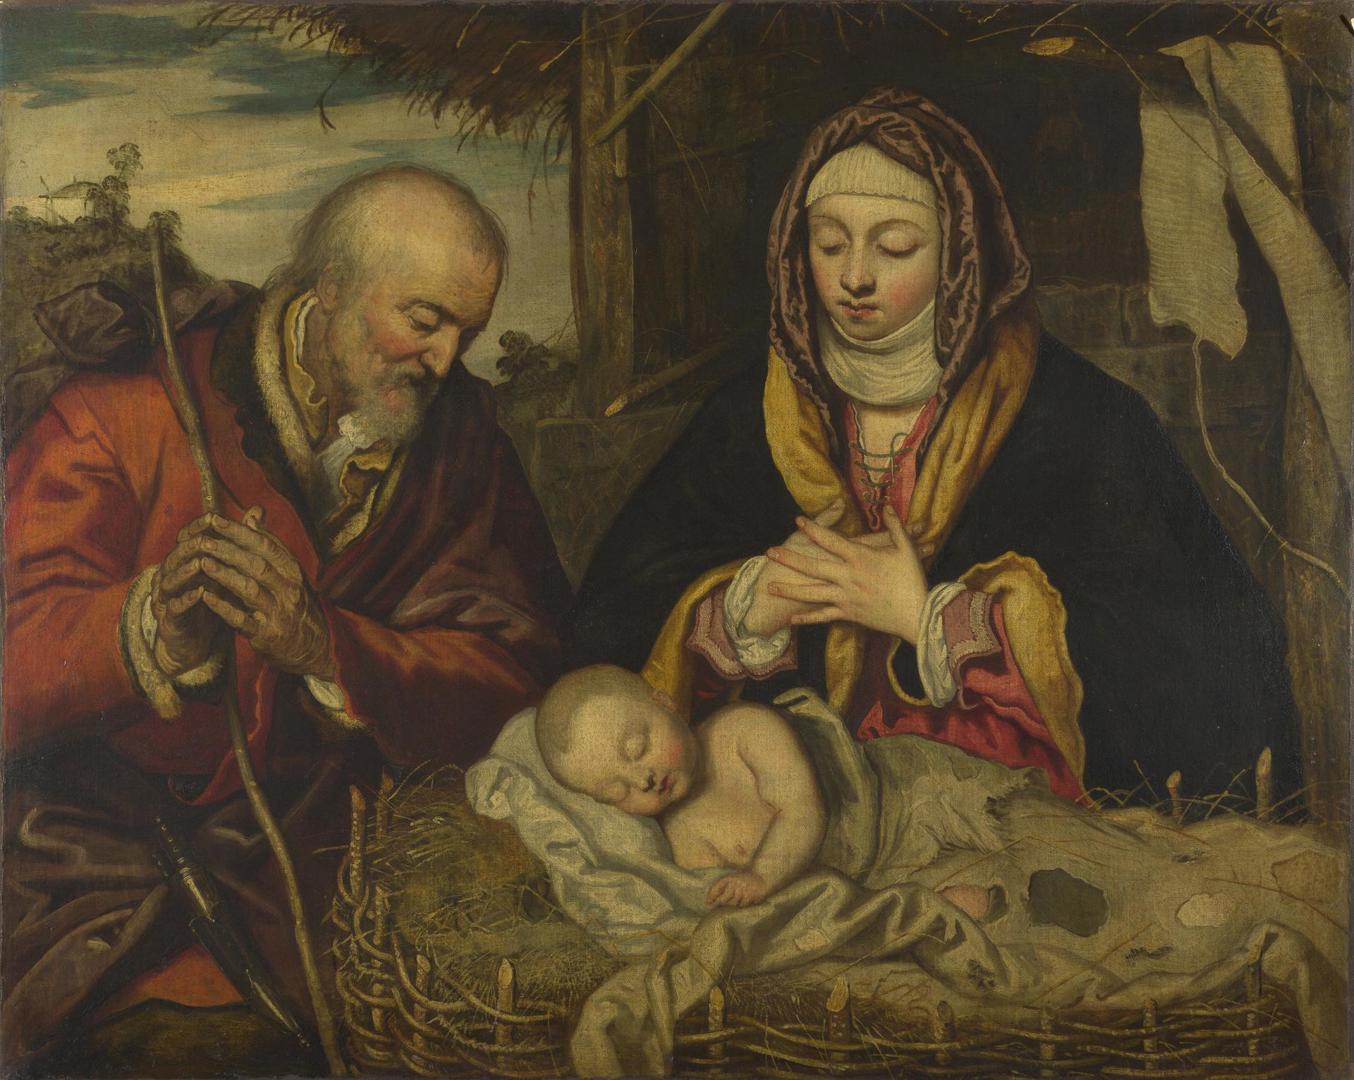 The Nativity by Follower of Jacopo Tintoretto